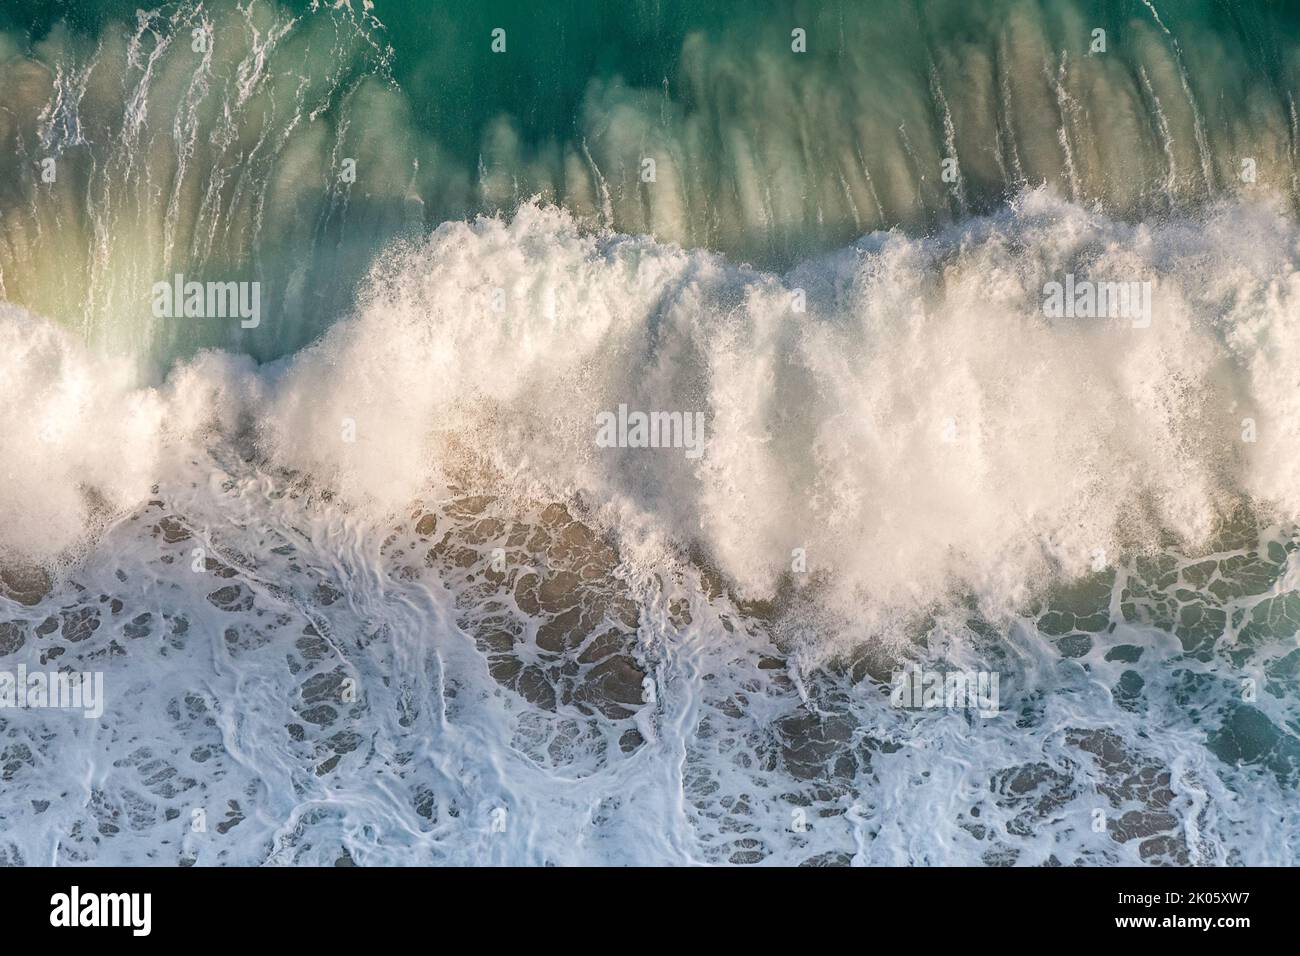 Top view of patterns of white foam from the impact of ocean waves on coastal rocks. South Africa Stock Photo